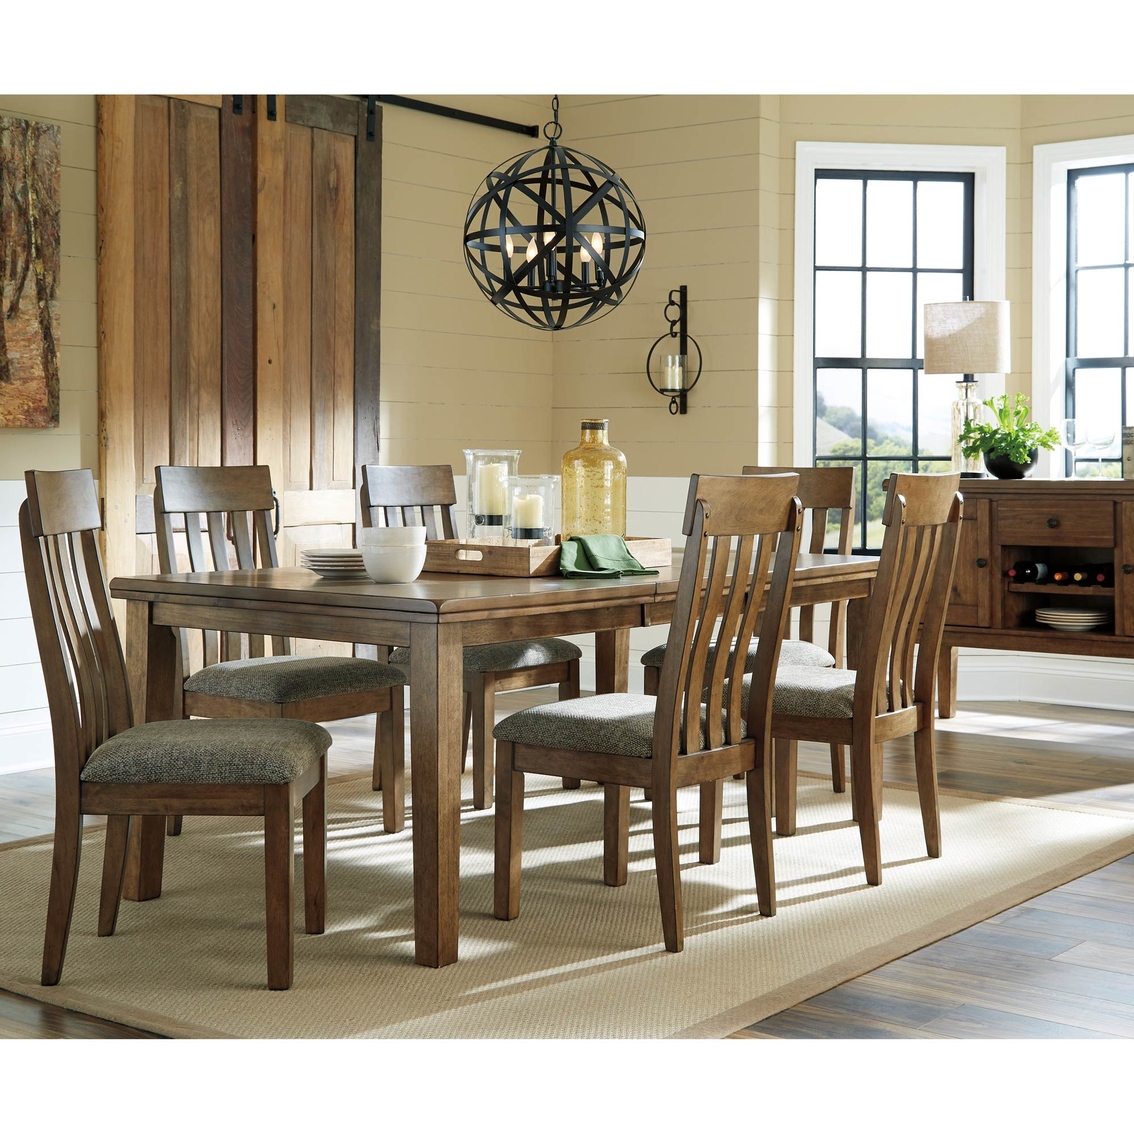 Benchcraft Flaybern 7 pc. Dining Set - Image 2 of 3